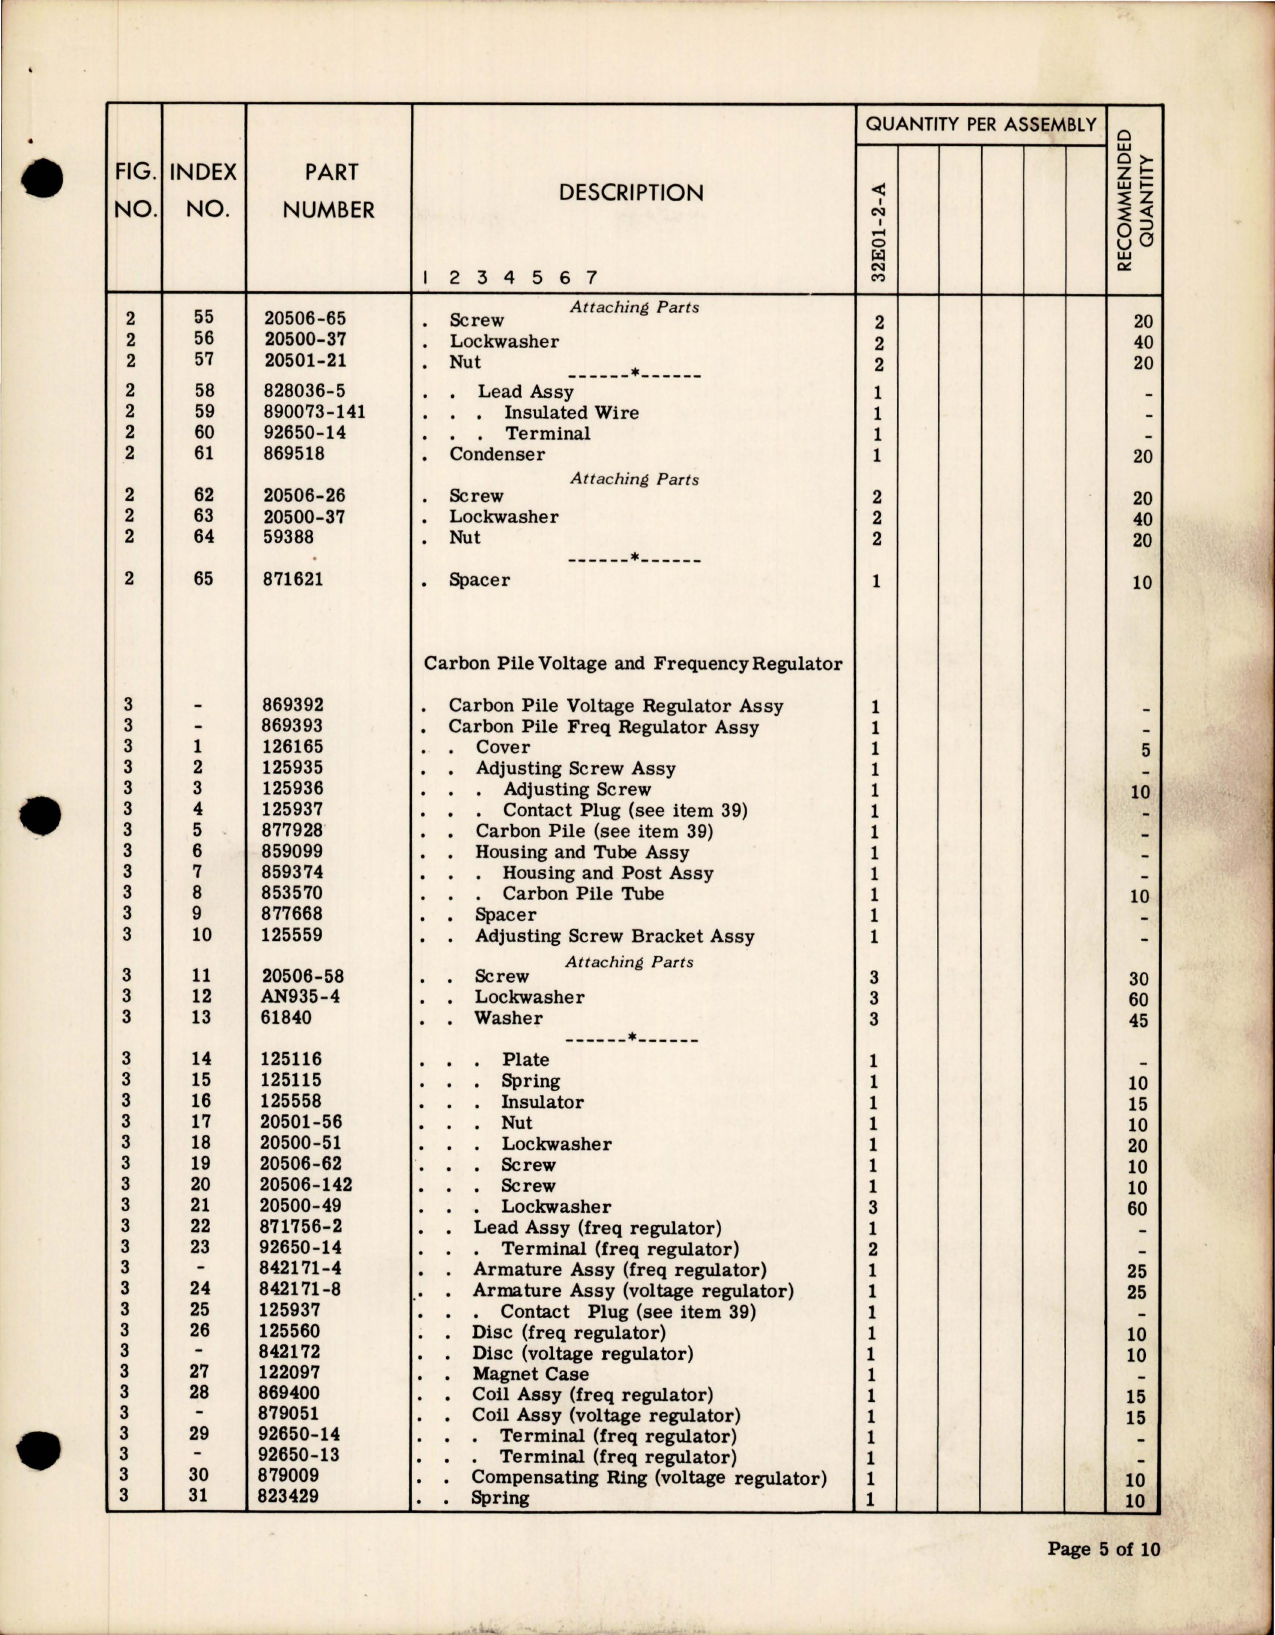 Sample page 5 from AirCorps Library document: Service Parts List for Inverter - 32E01-2-A 